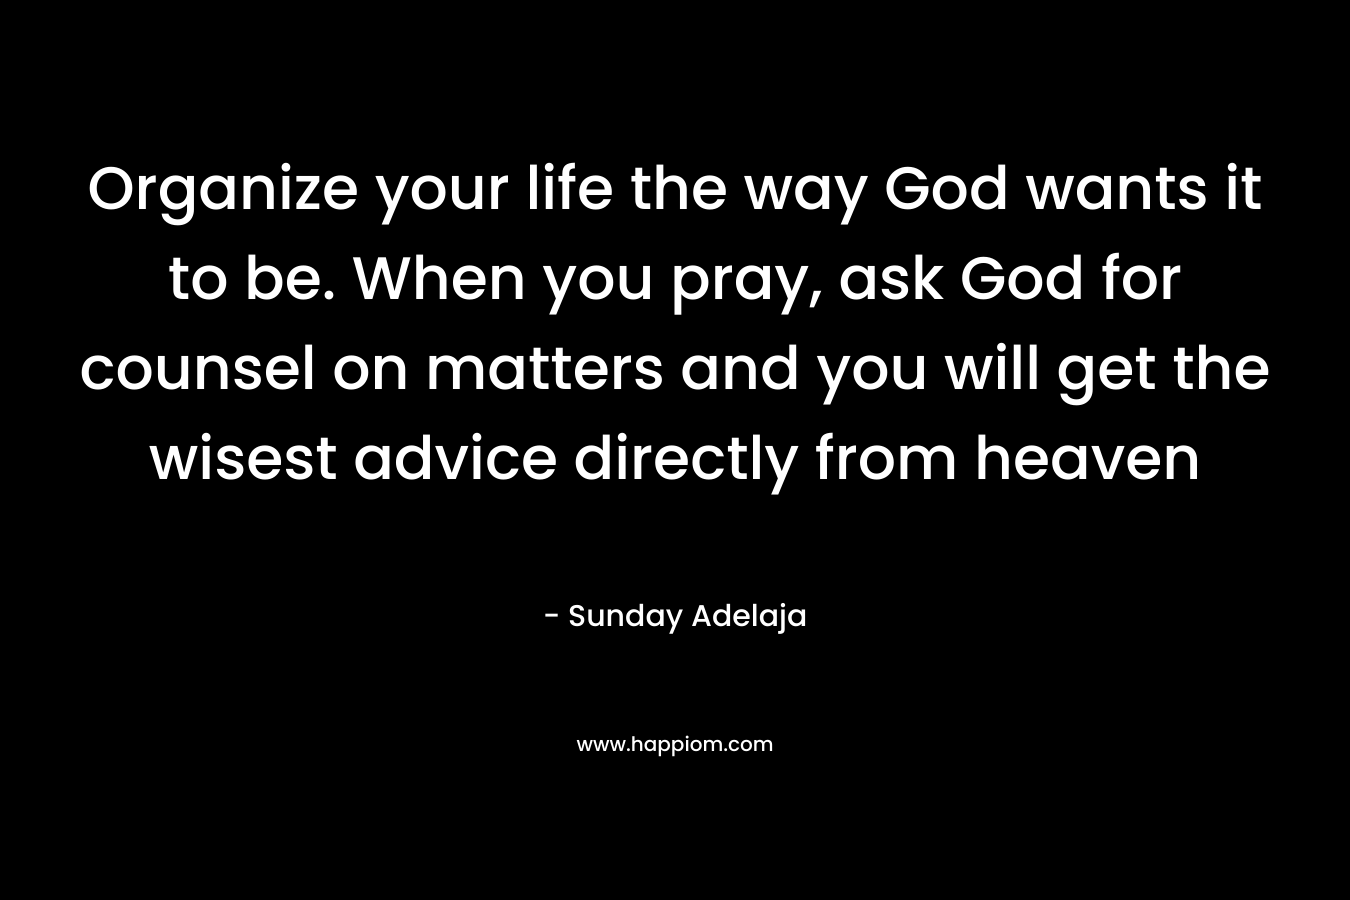 Organize your life the way God wants it to be. When you pray, ask God for counsel on matters and you will get the wisest advice directly from heaven